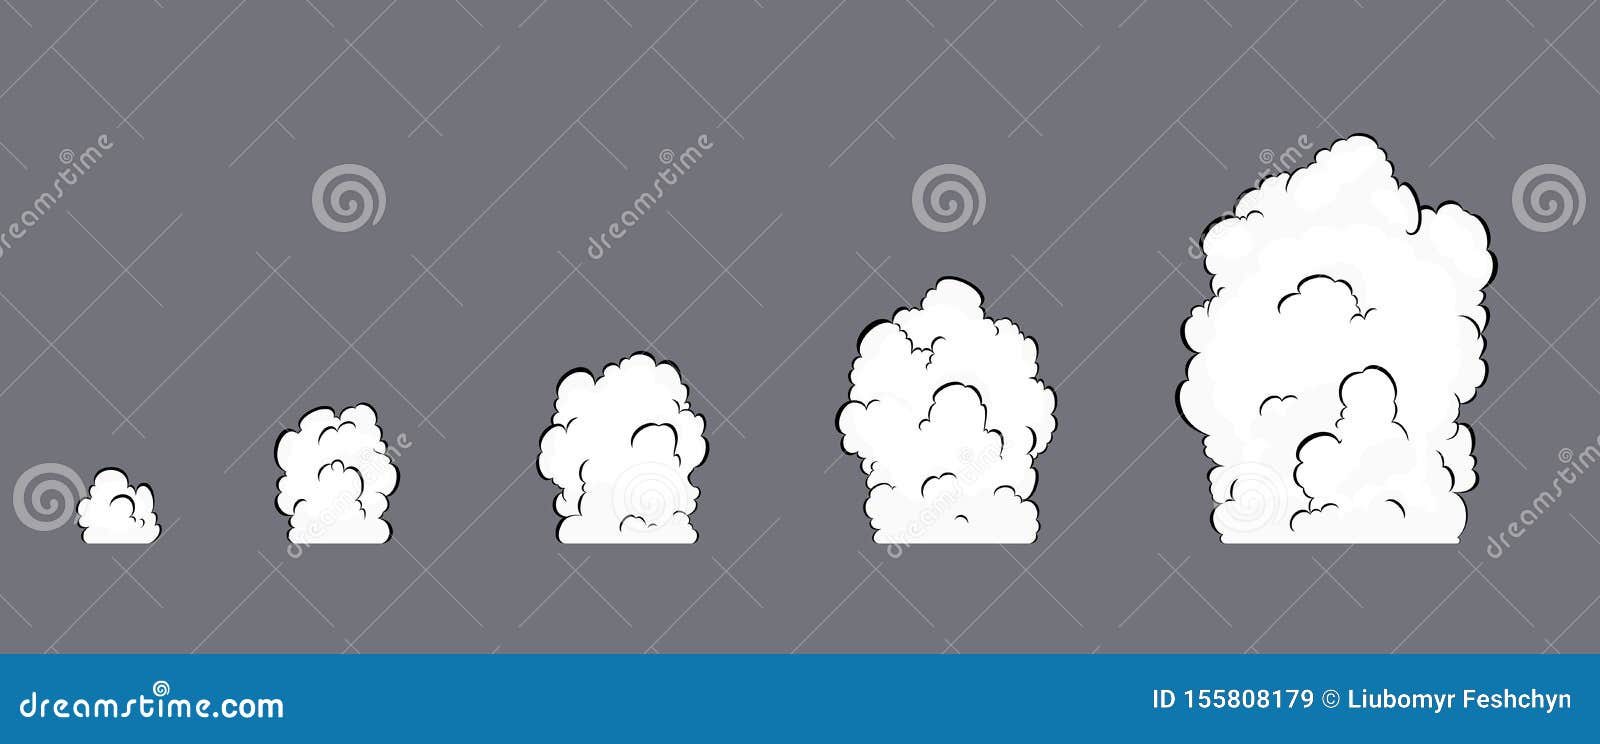 Smoke Explosion Animation. Smoke Animation. Explosion Animation. Sprite  Sheet for Game, Cartoon or Animation. Stock Vector - Illustration of boom,  classic: 155808179